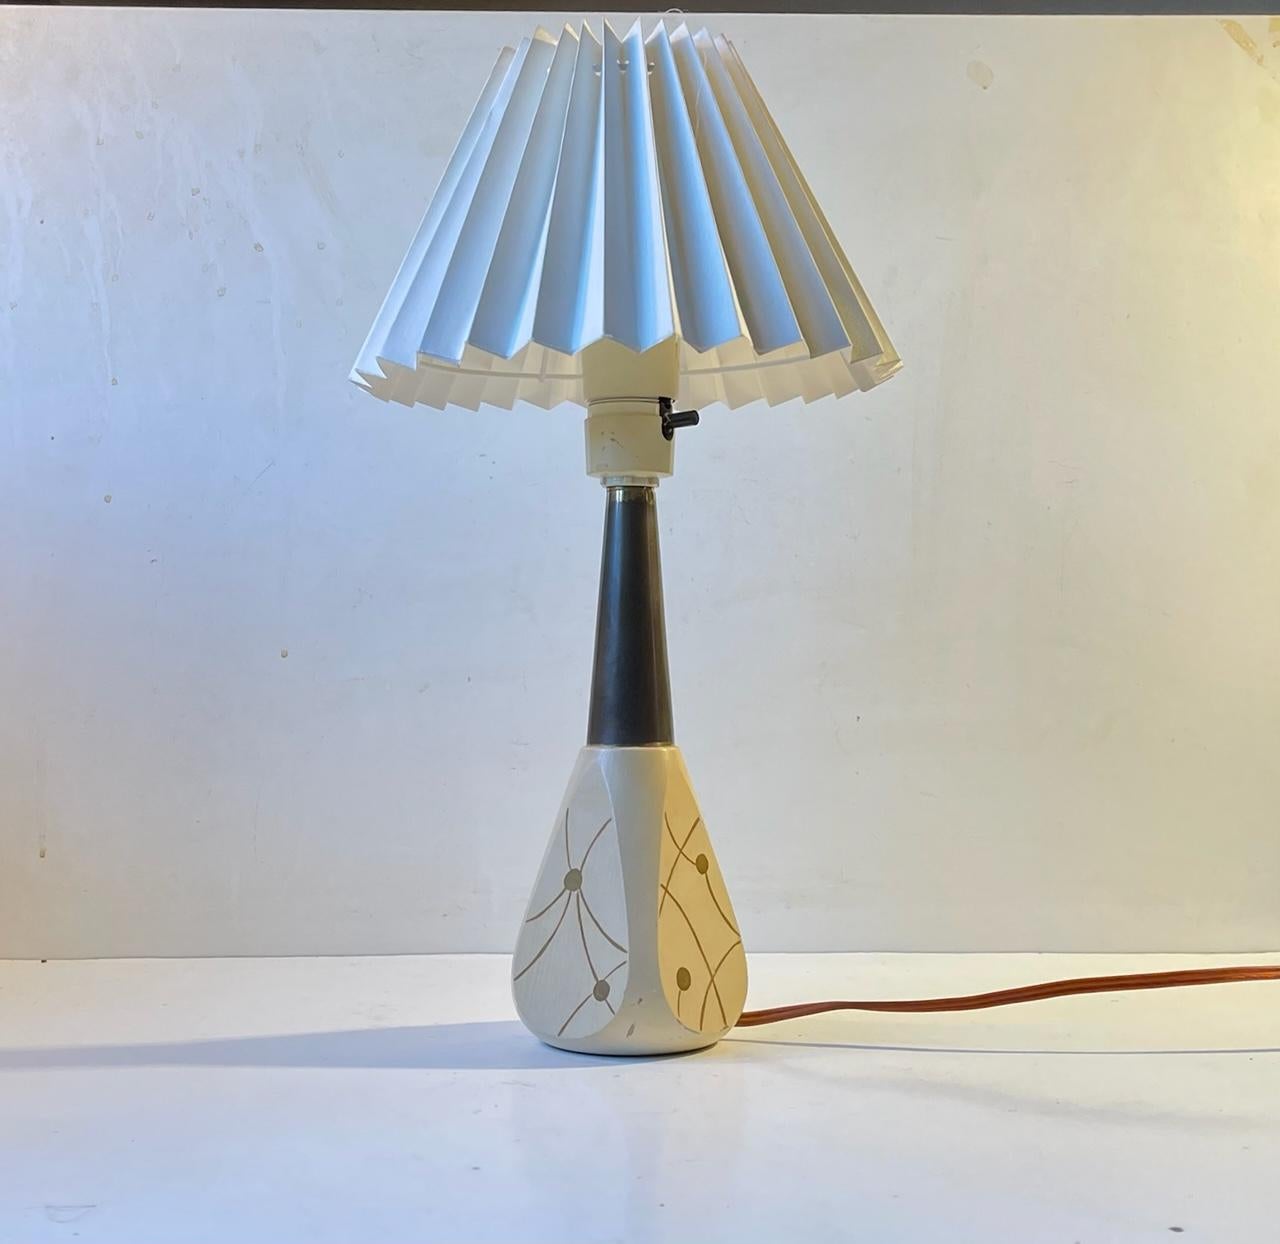 Italian 1950s table light composed of a lacquered wooden bas with handprinted atomic decor, a brass top and a white fluted acrylic shade. It was manufactured in italy during the 1950s in a style reminiscent of Stilnovo and Svend Aage Holm Sørensen.